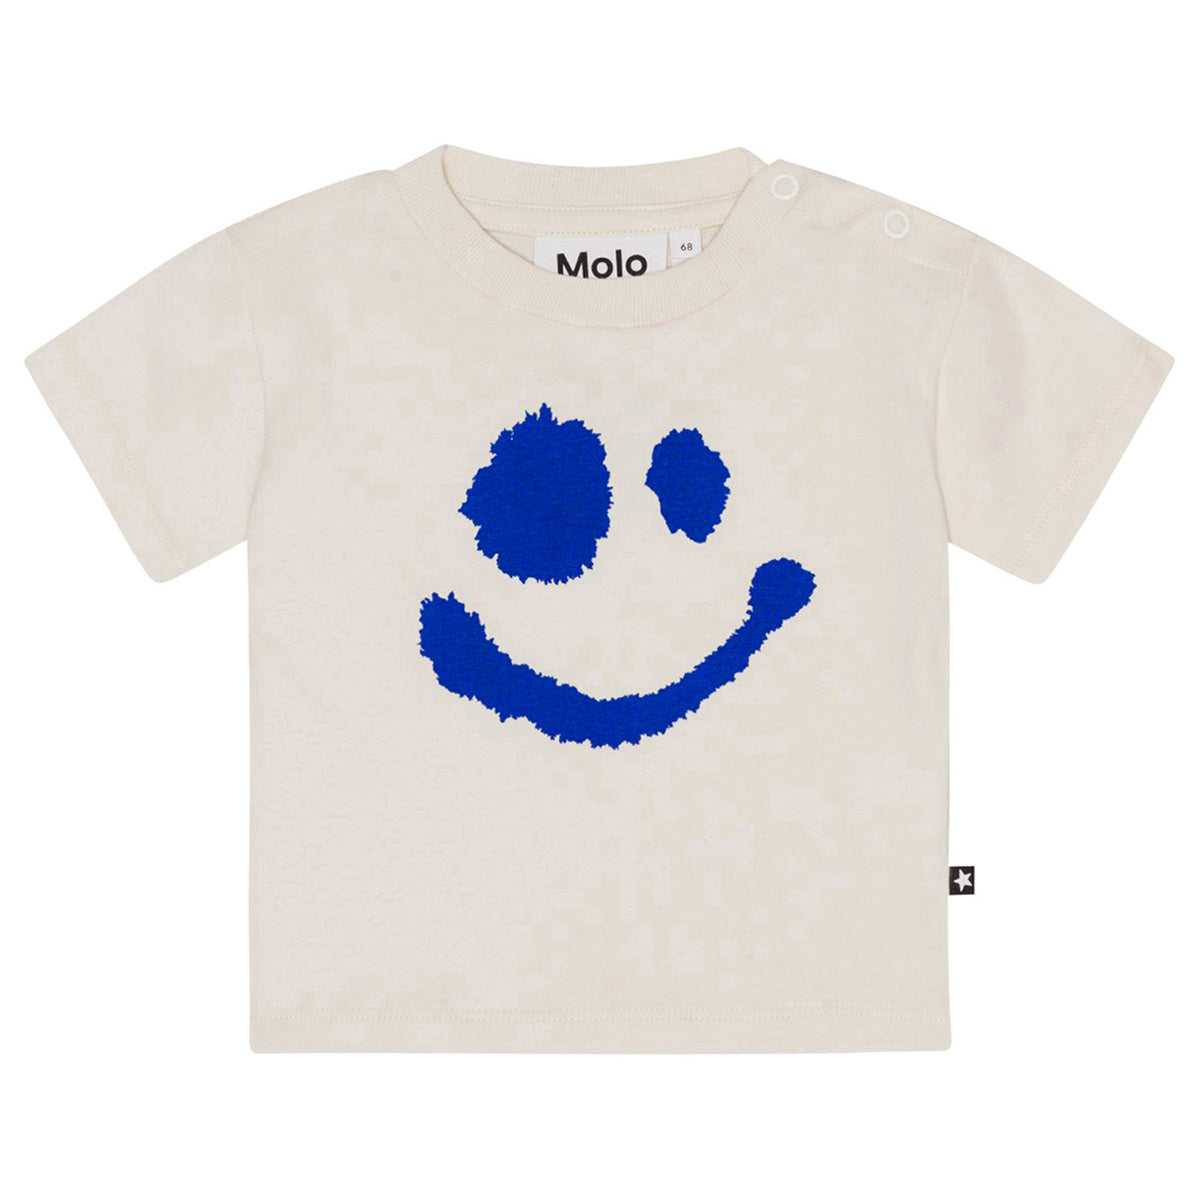 The Enzo Tee from Molo. Classic t-shirt for small children in organic cotton